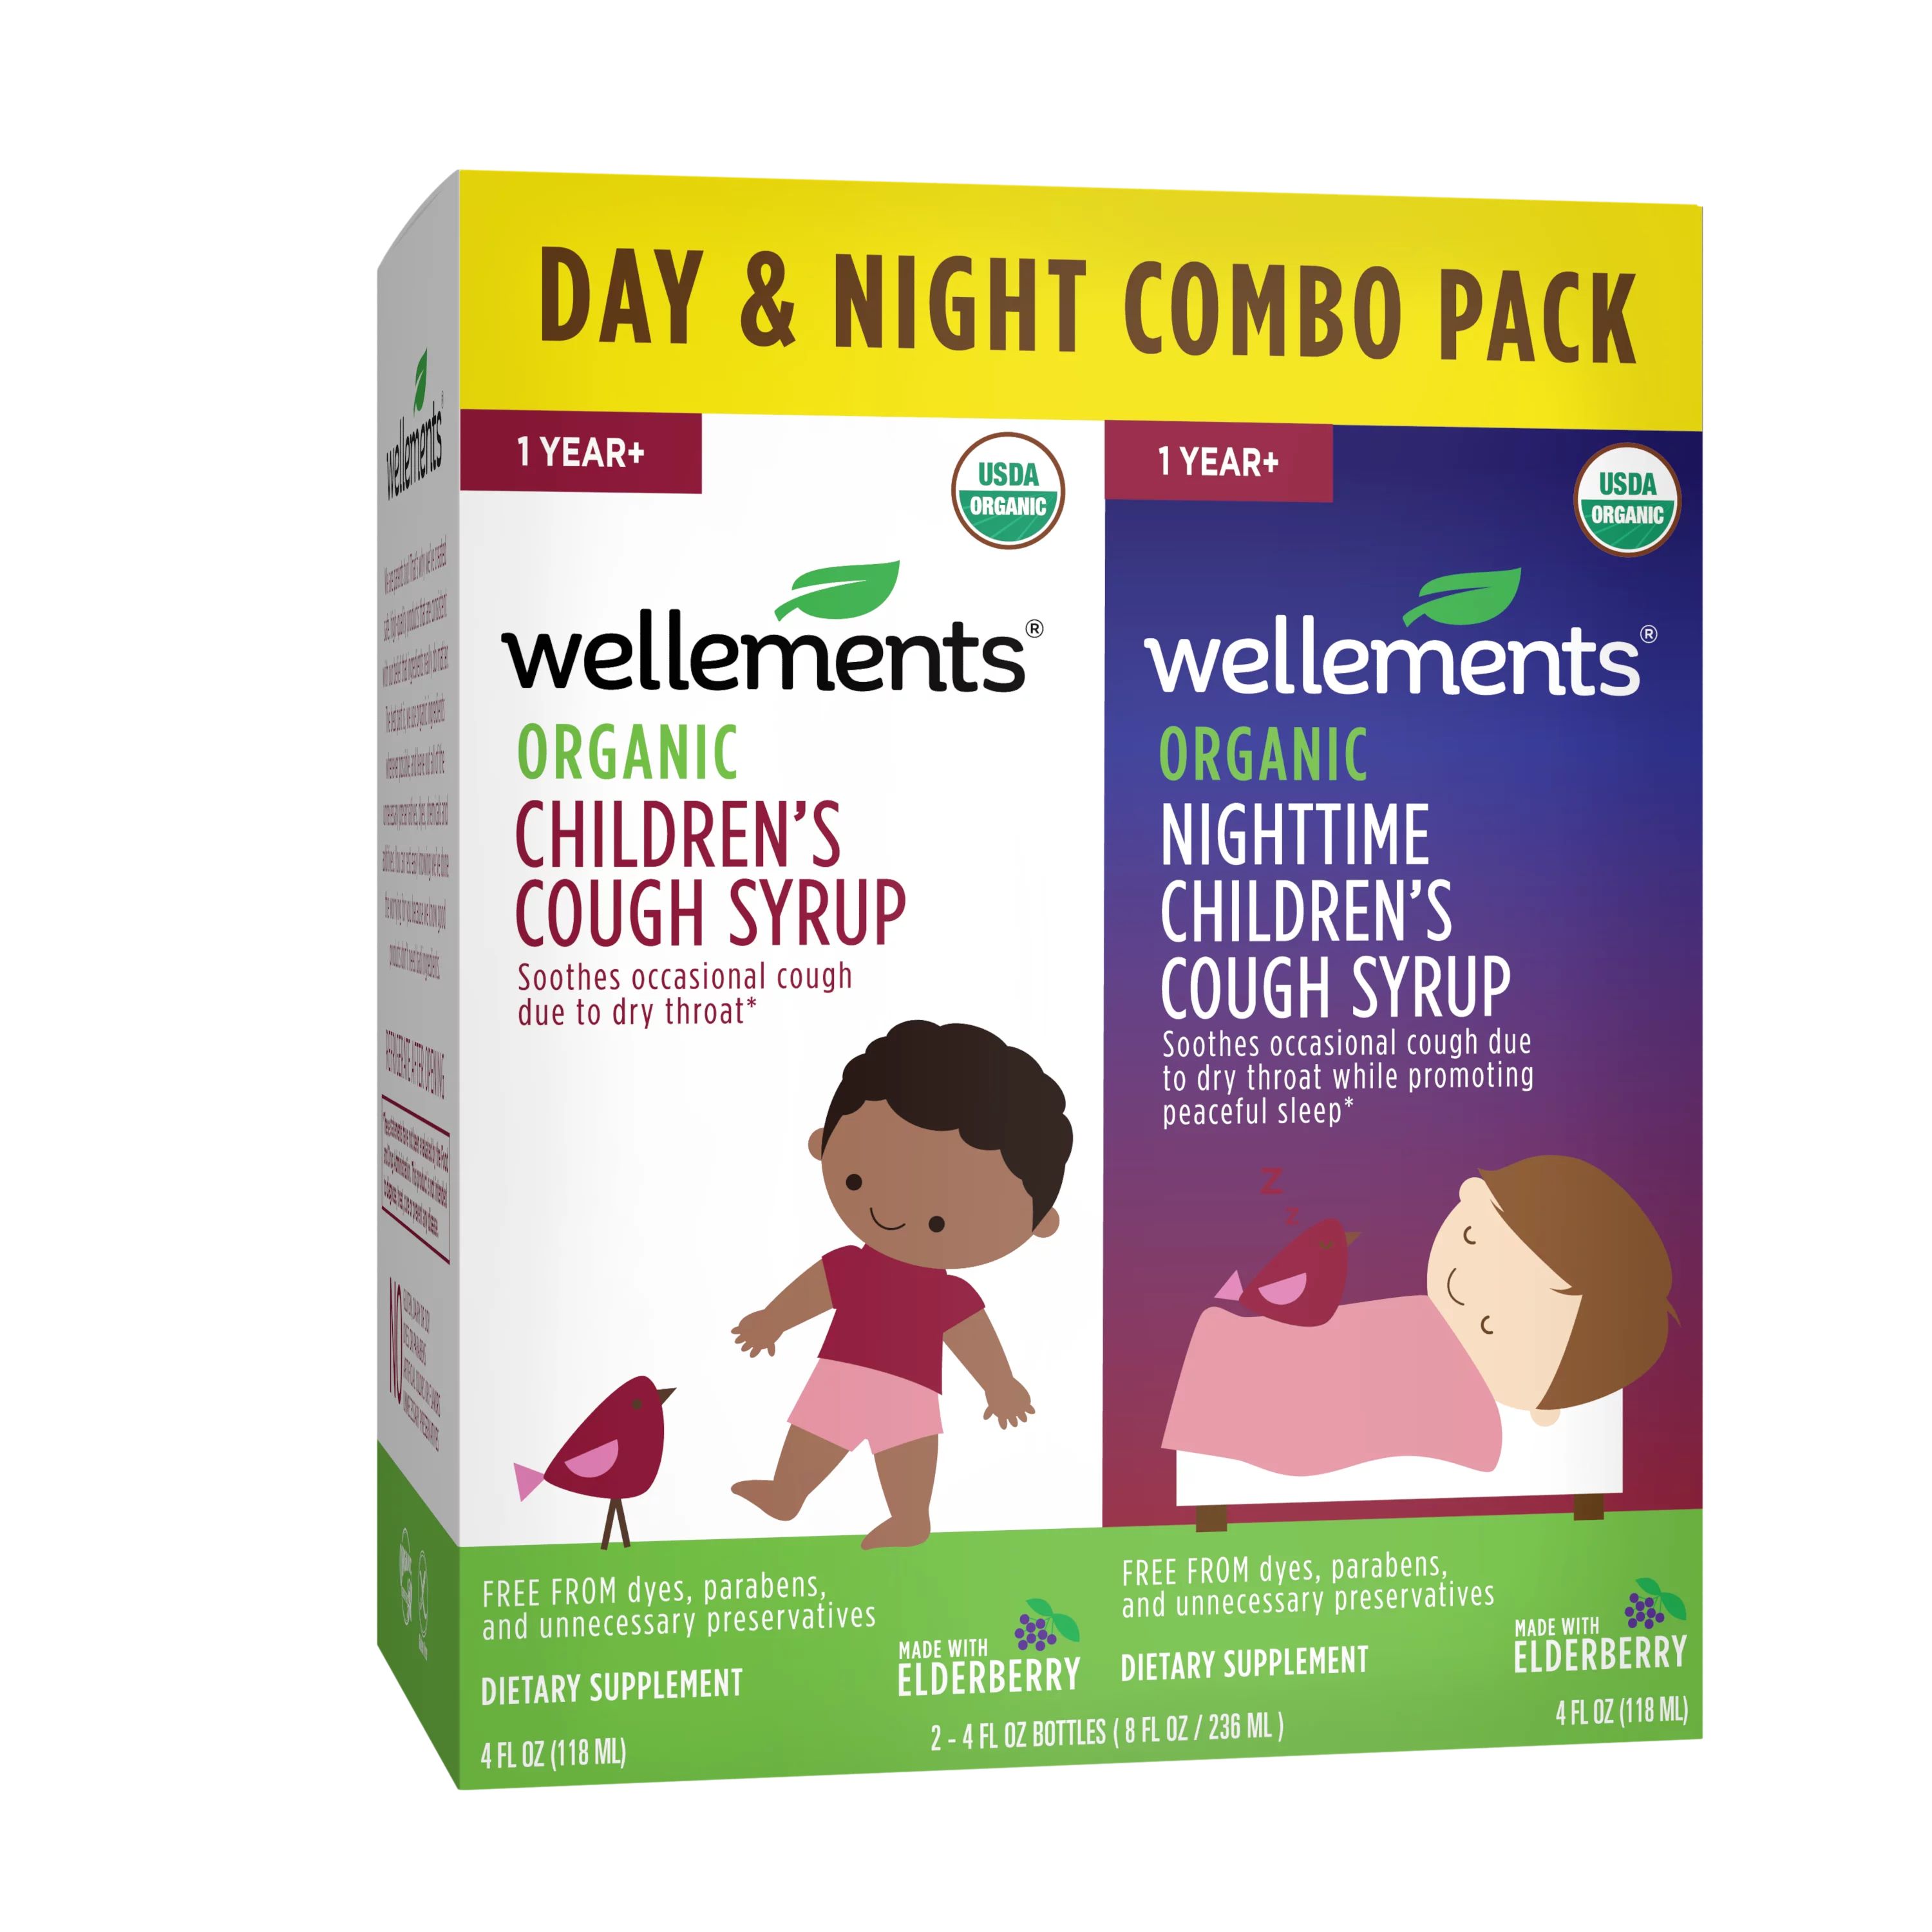 Wellements Organic Children's Cough Syrup Day & Night Combo Pack | Walmart (US)